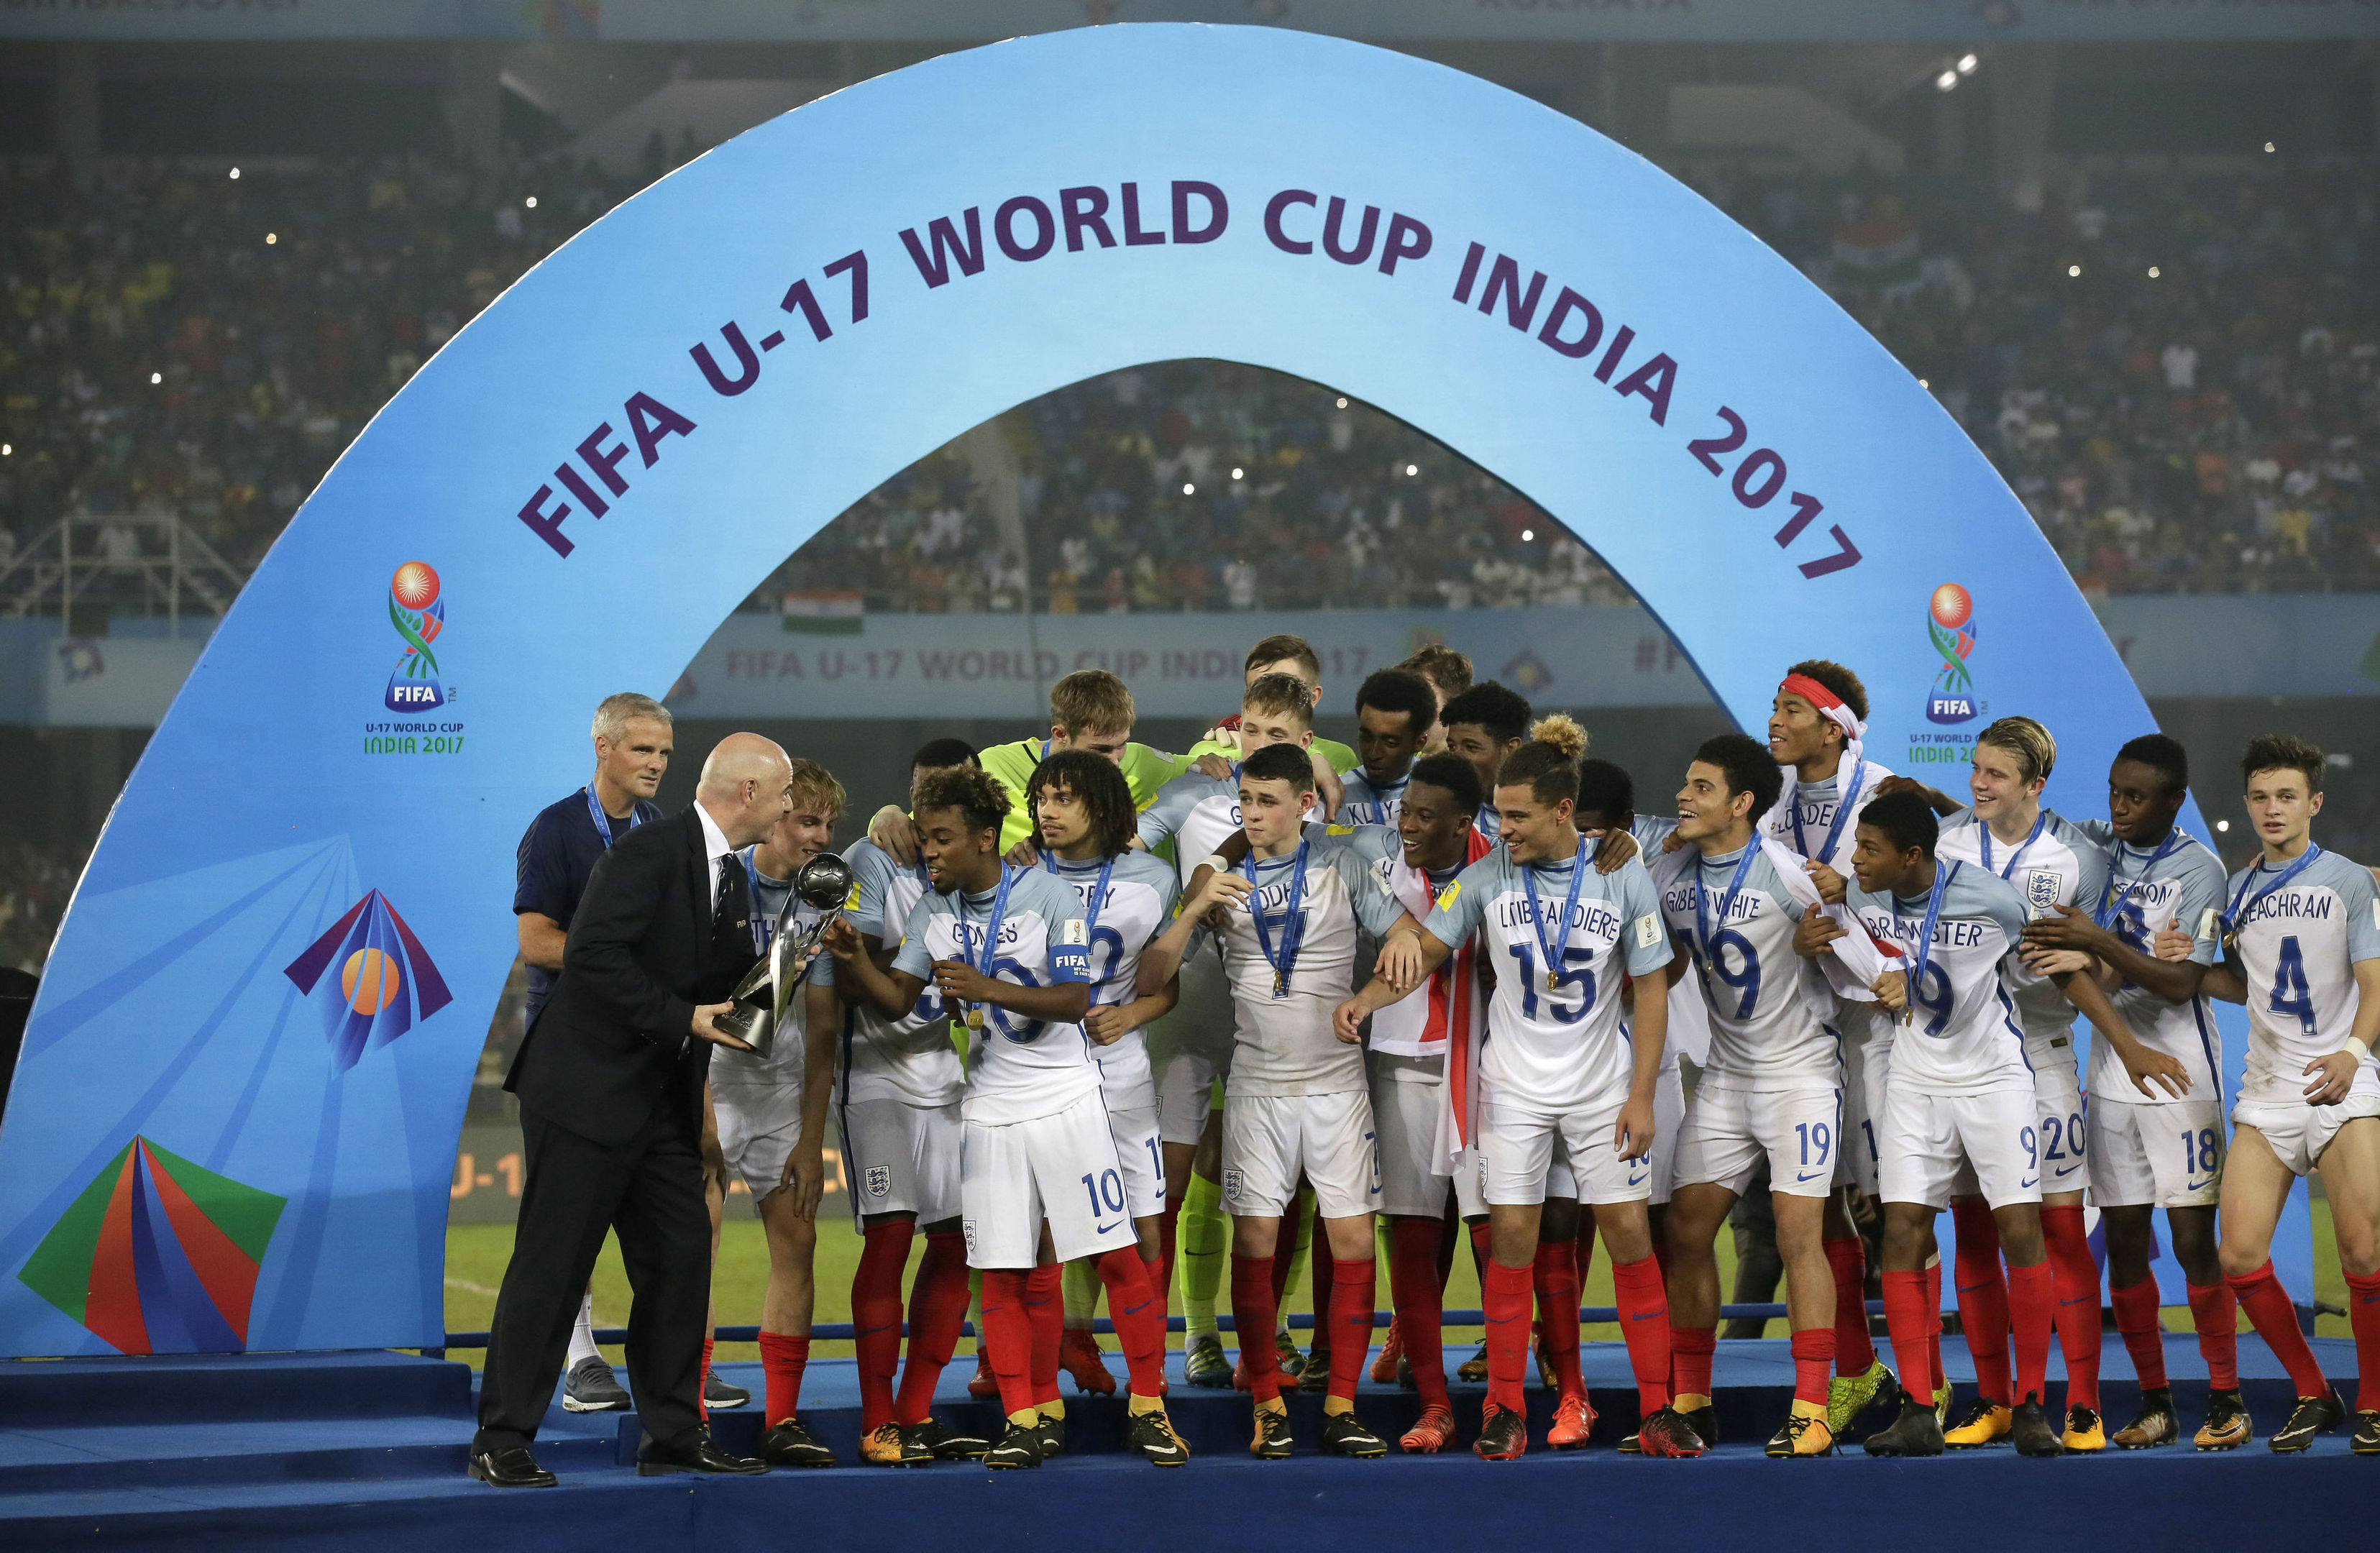 FIFA President Gianni Infantino hands the trophy to England's Angel Gomes after they won the FIFA U-17 World Cup in Kolkata, India, Saturday, Oct. 28, 2017. (AP Photo/Anupam Nath)